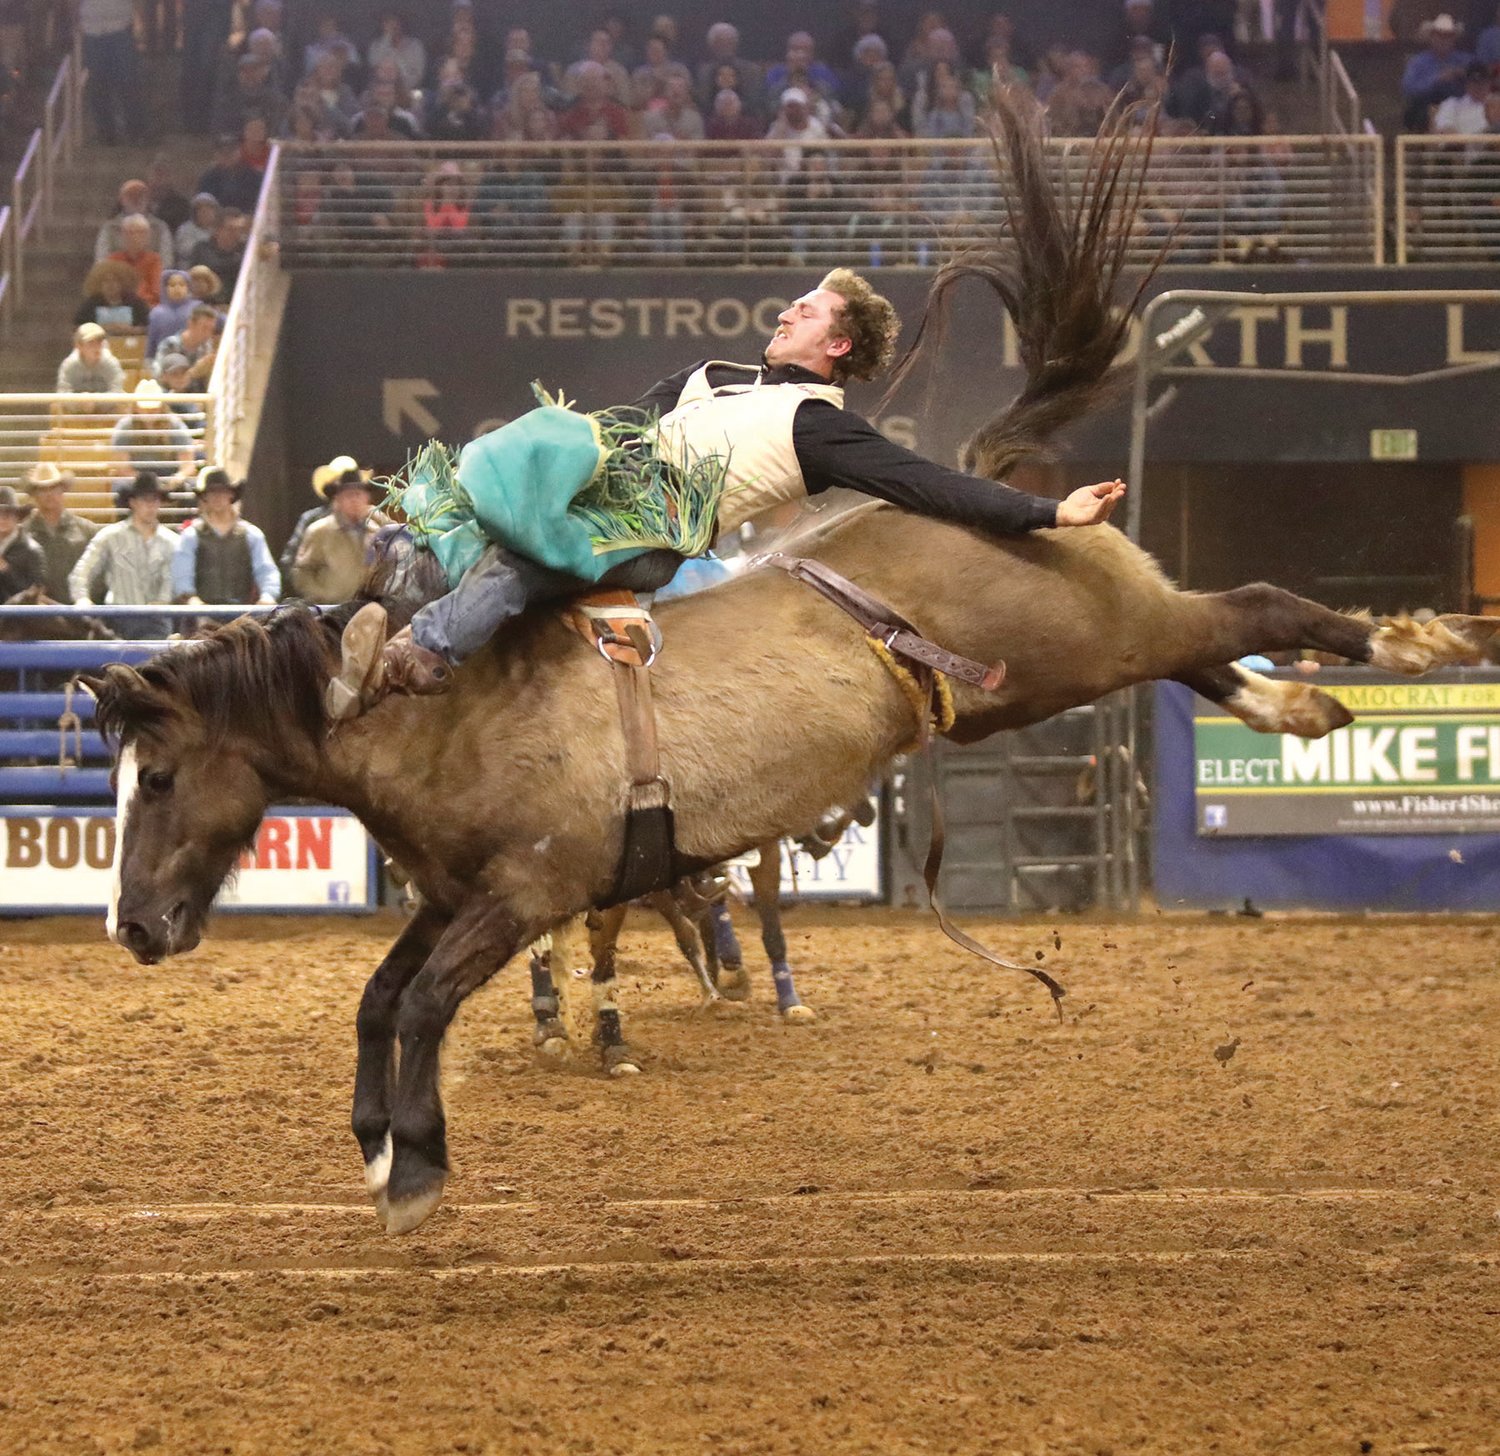 With the thrill of professional roughstock riders and the Silver Spurs’ biggest broncs and baddest bulls, there will have a showdown! Get ready for the Silver Spurs Southern Showdown, two nights of rodeo’s wildest rides at the Silver Spurs Arena in Kissimmee on Oct. 1 and 2 at 7:30 p.m.